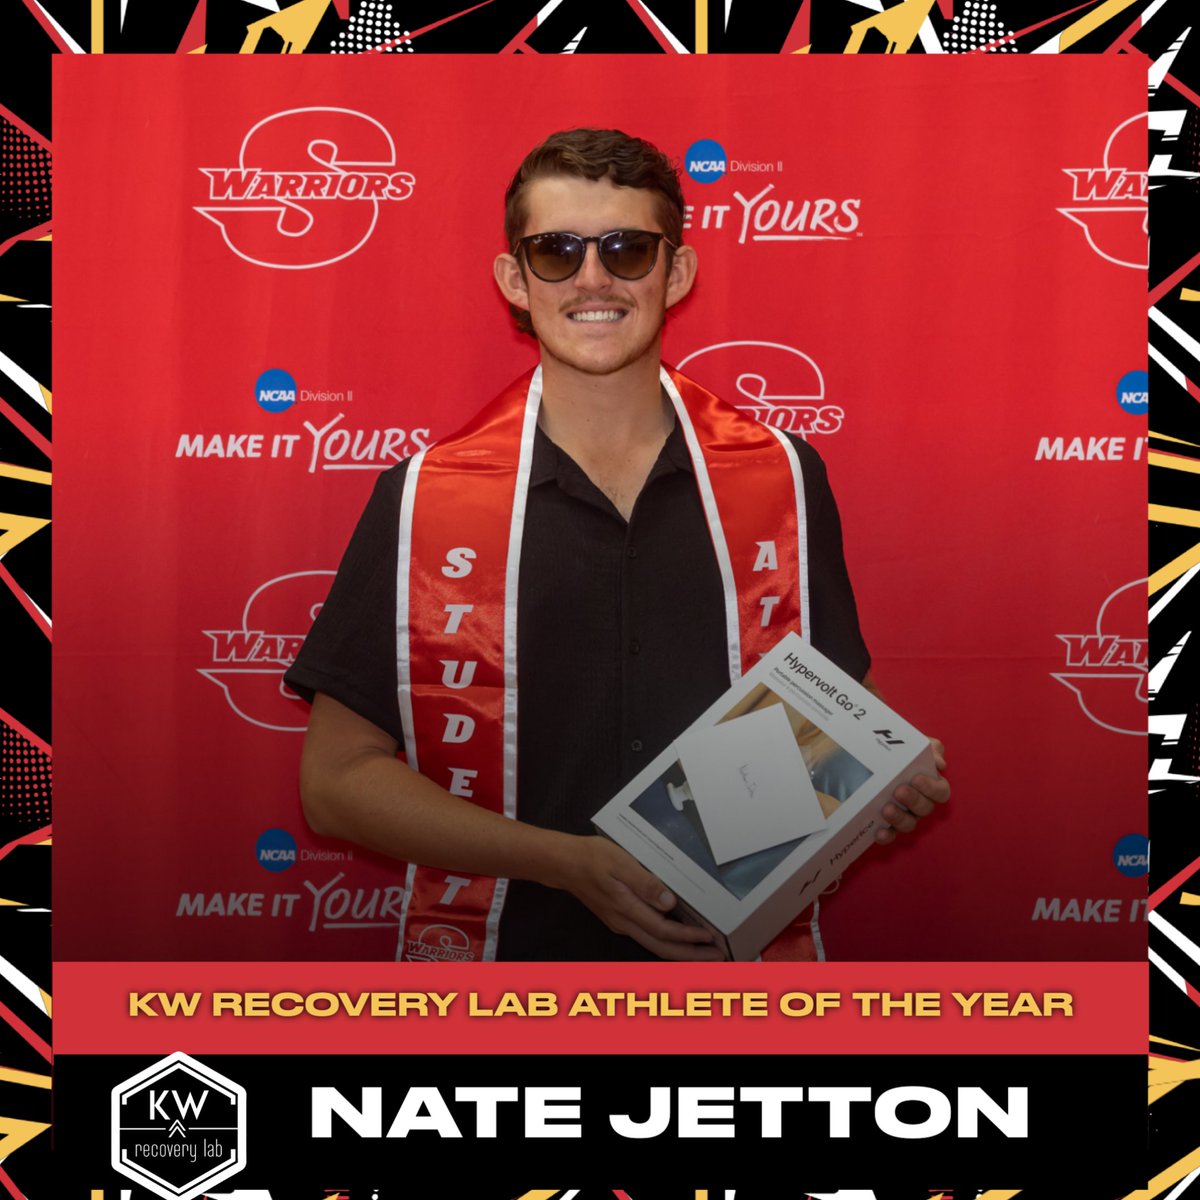 In the next five days, we will be showing the award winners from The Stanys that was held on May 17. The second is the recipient of the KW Recovery Lab Athlete of the Year: Nate Jetton #ValleyTough